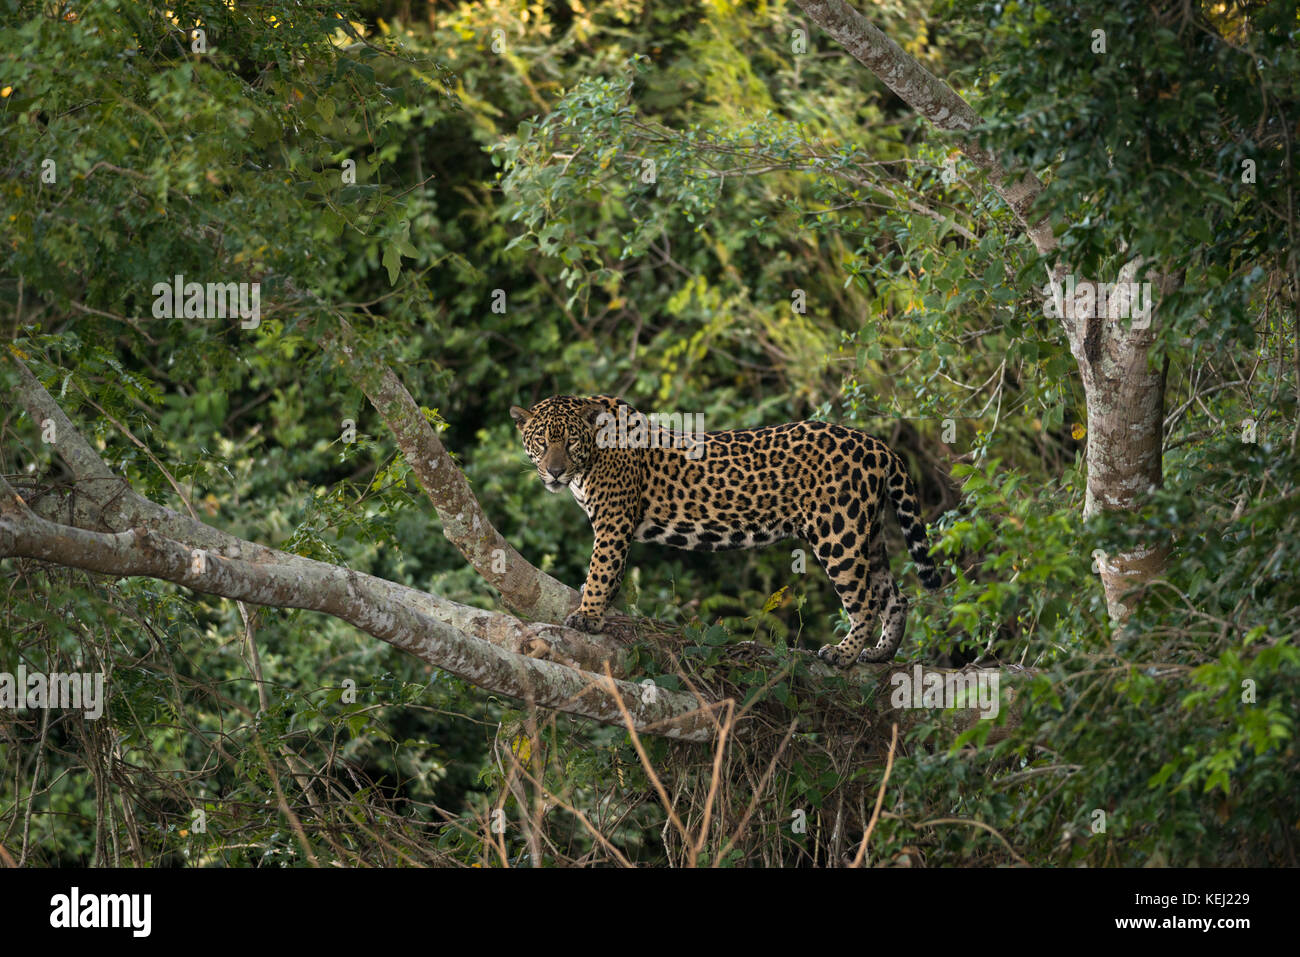 A Jaguar on a tree in North Pantanal, Brazil Stock Photo